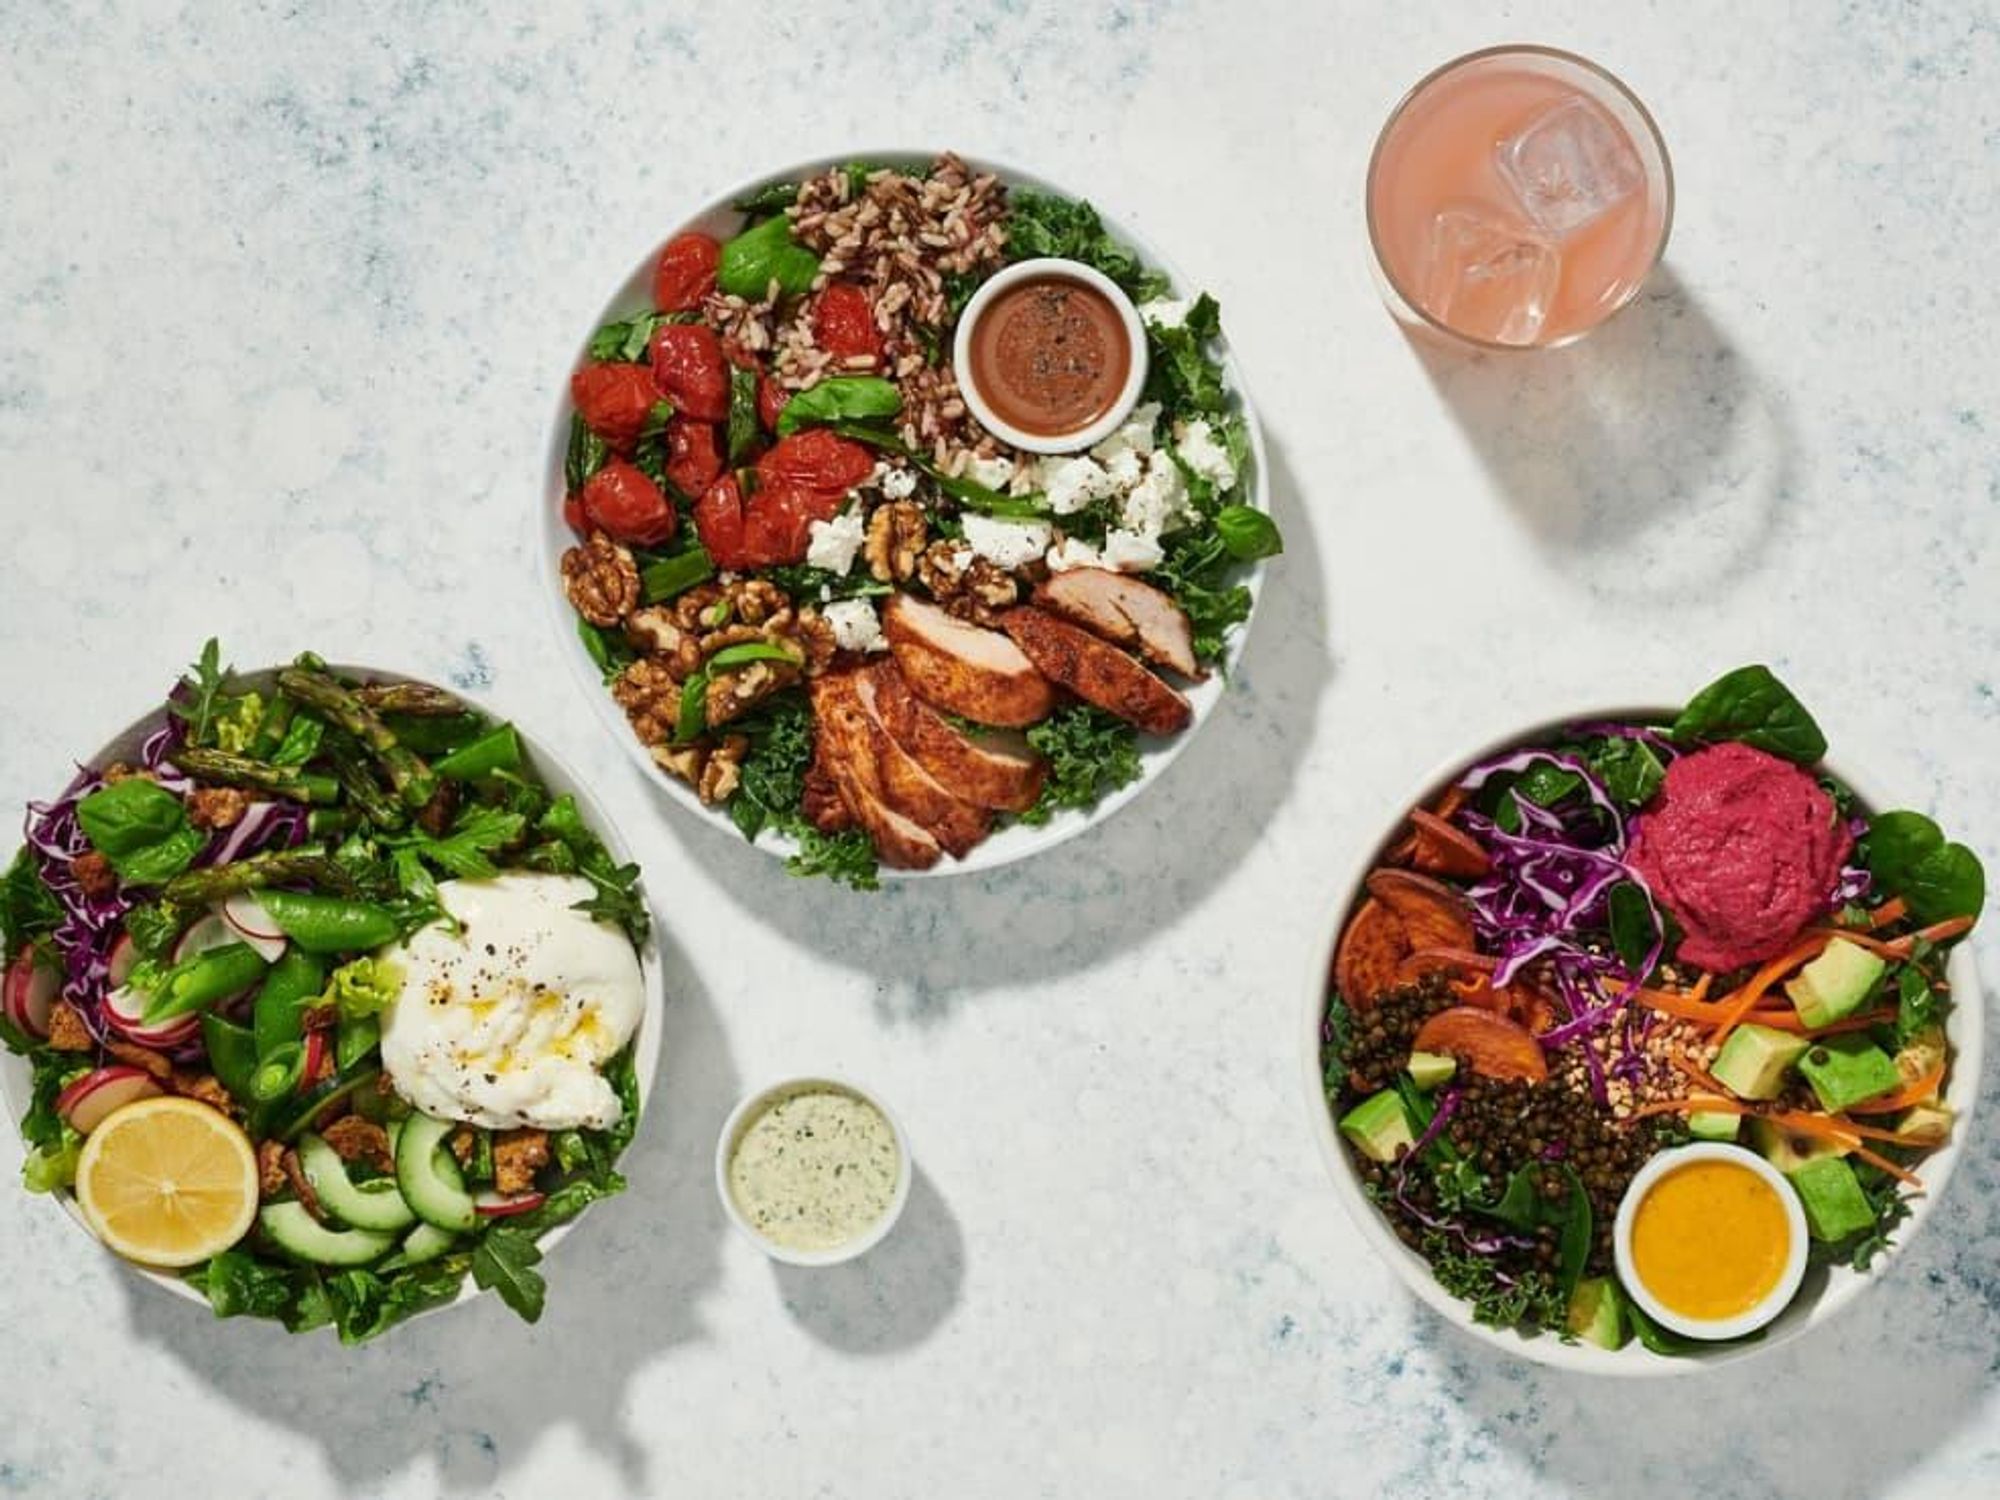 Salad and Go set to open Lewisville location in December